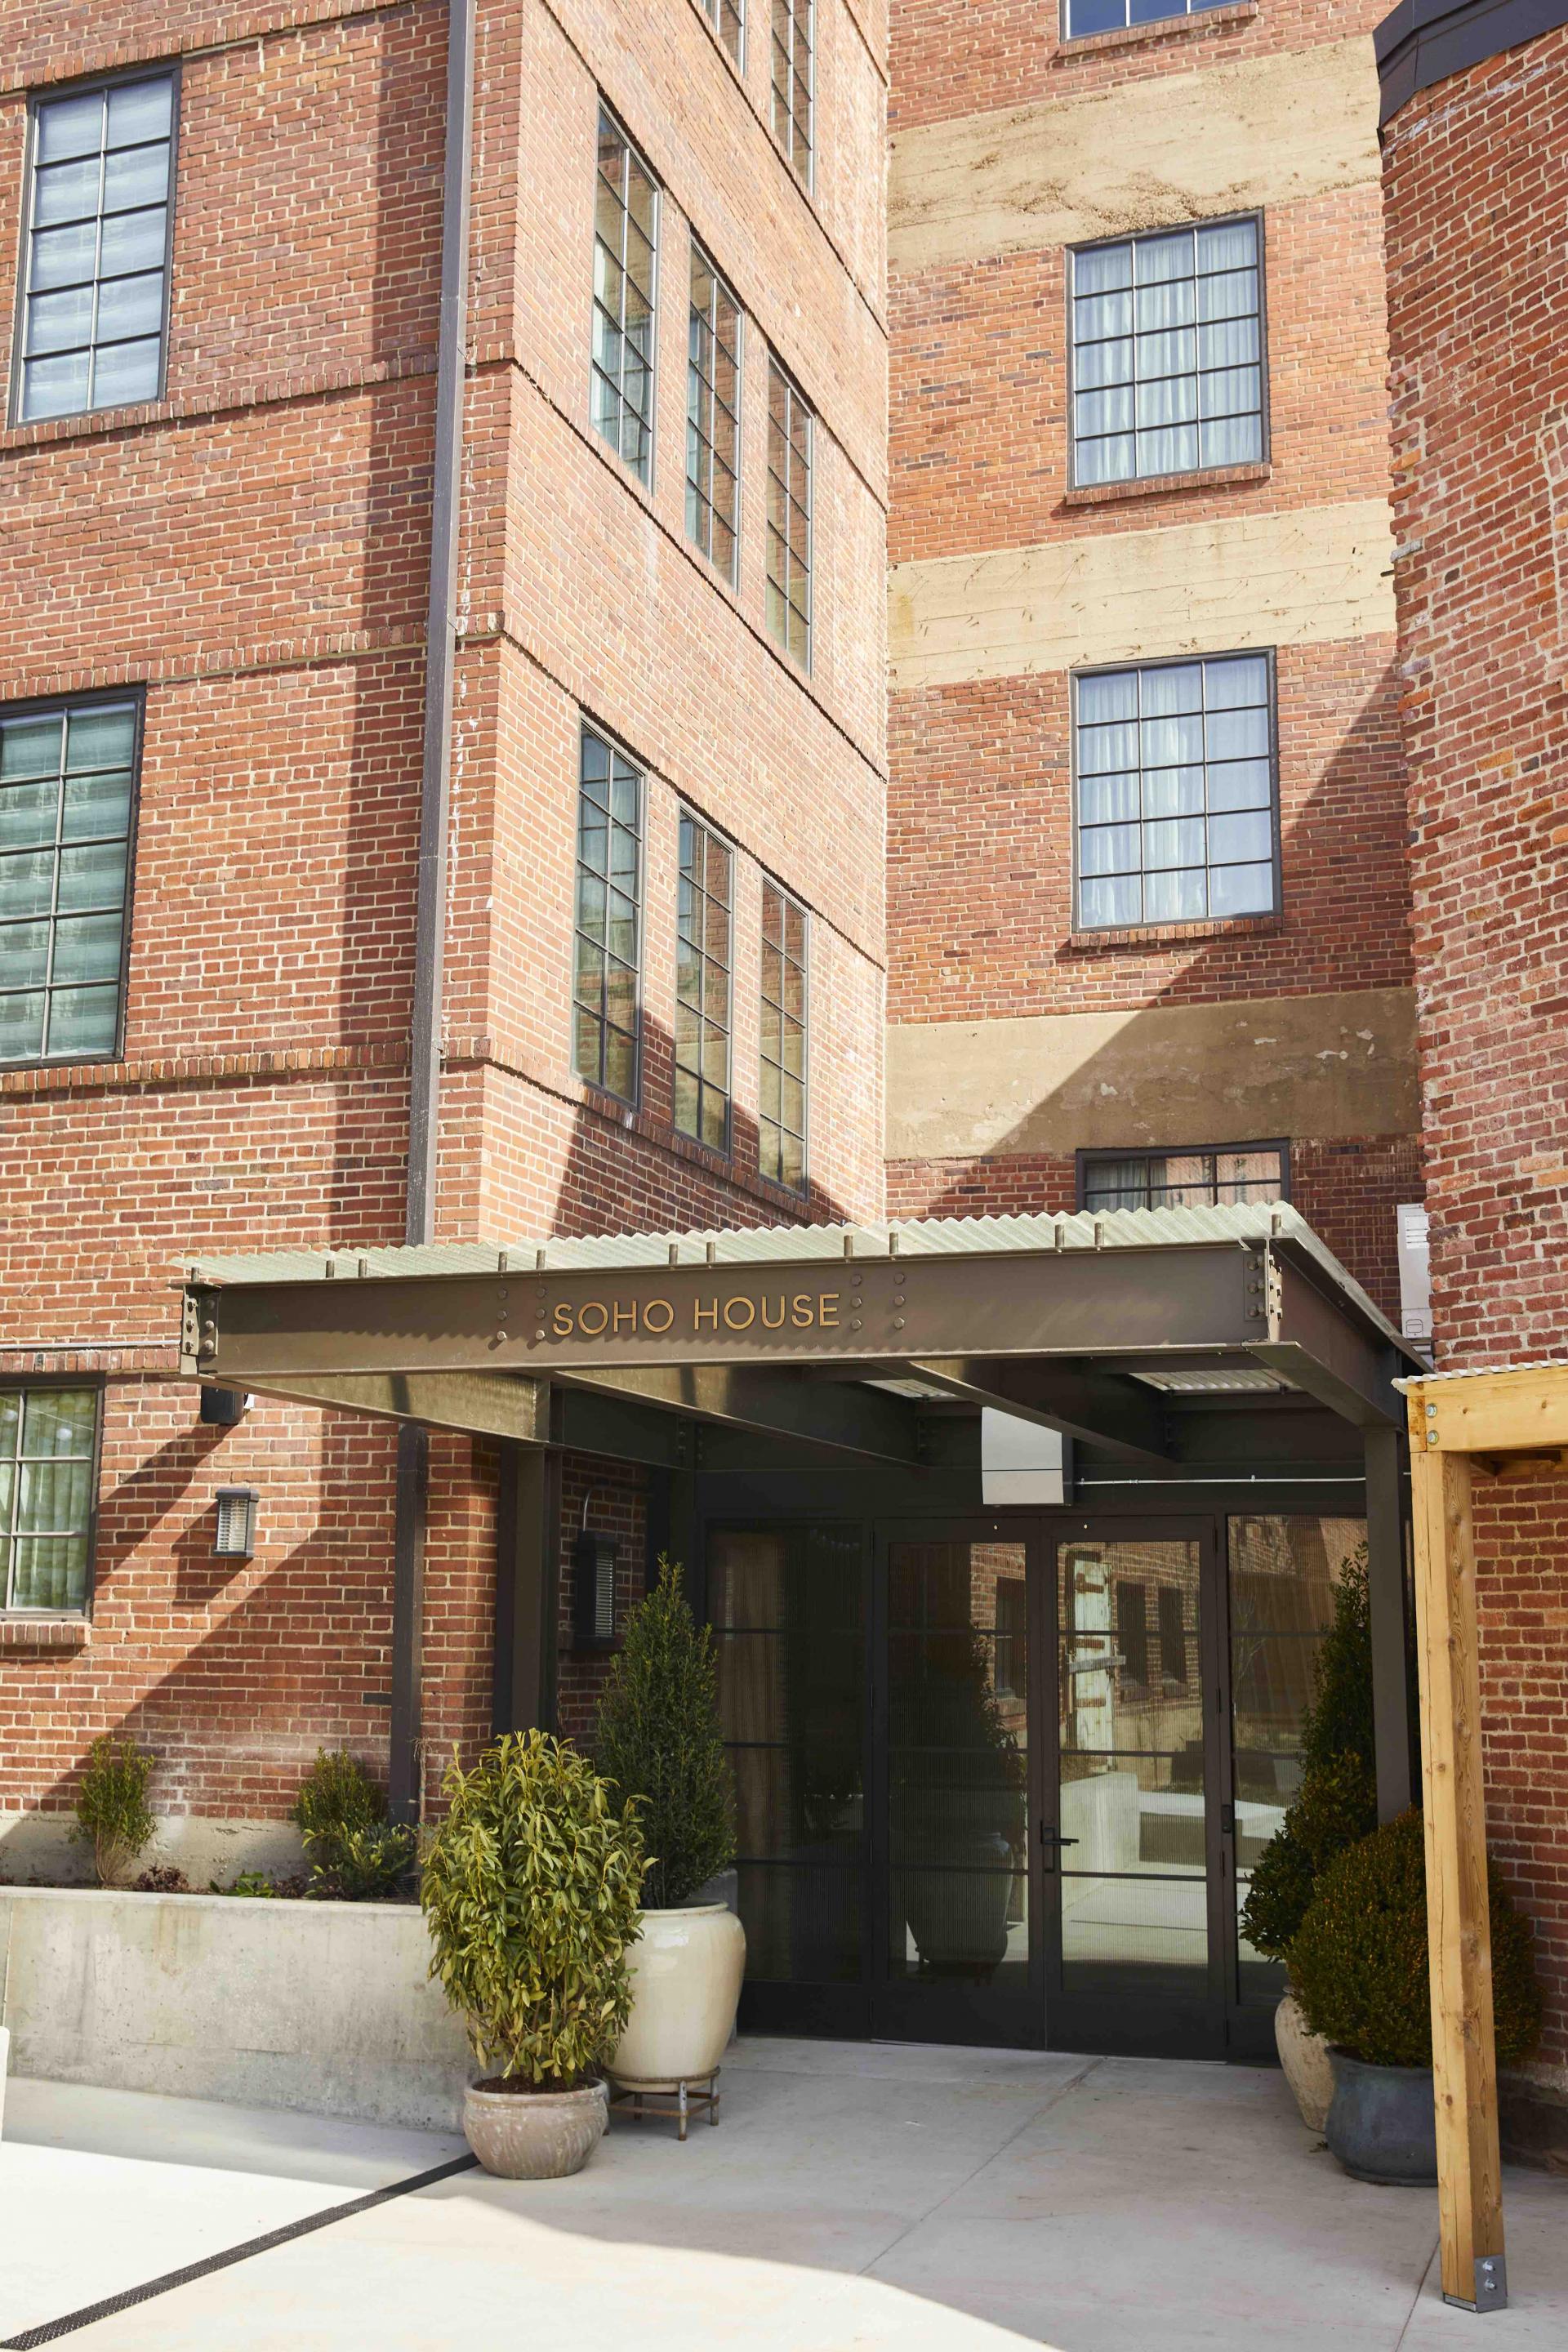 Soho House Nashville opened in two of the historic May Hosiery Mills buildings in 2022